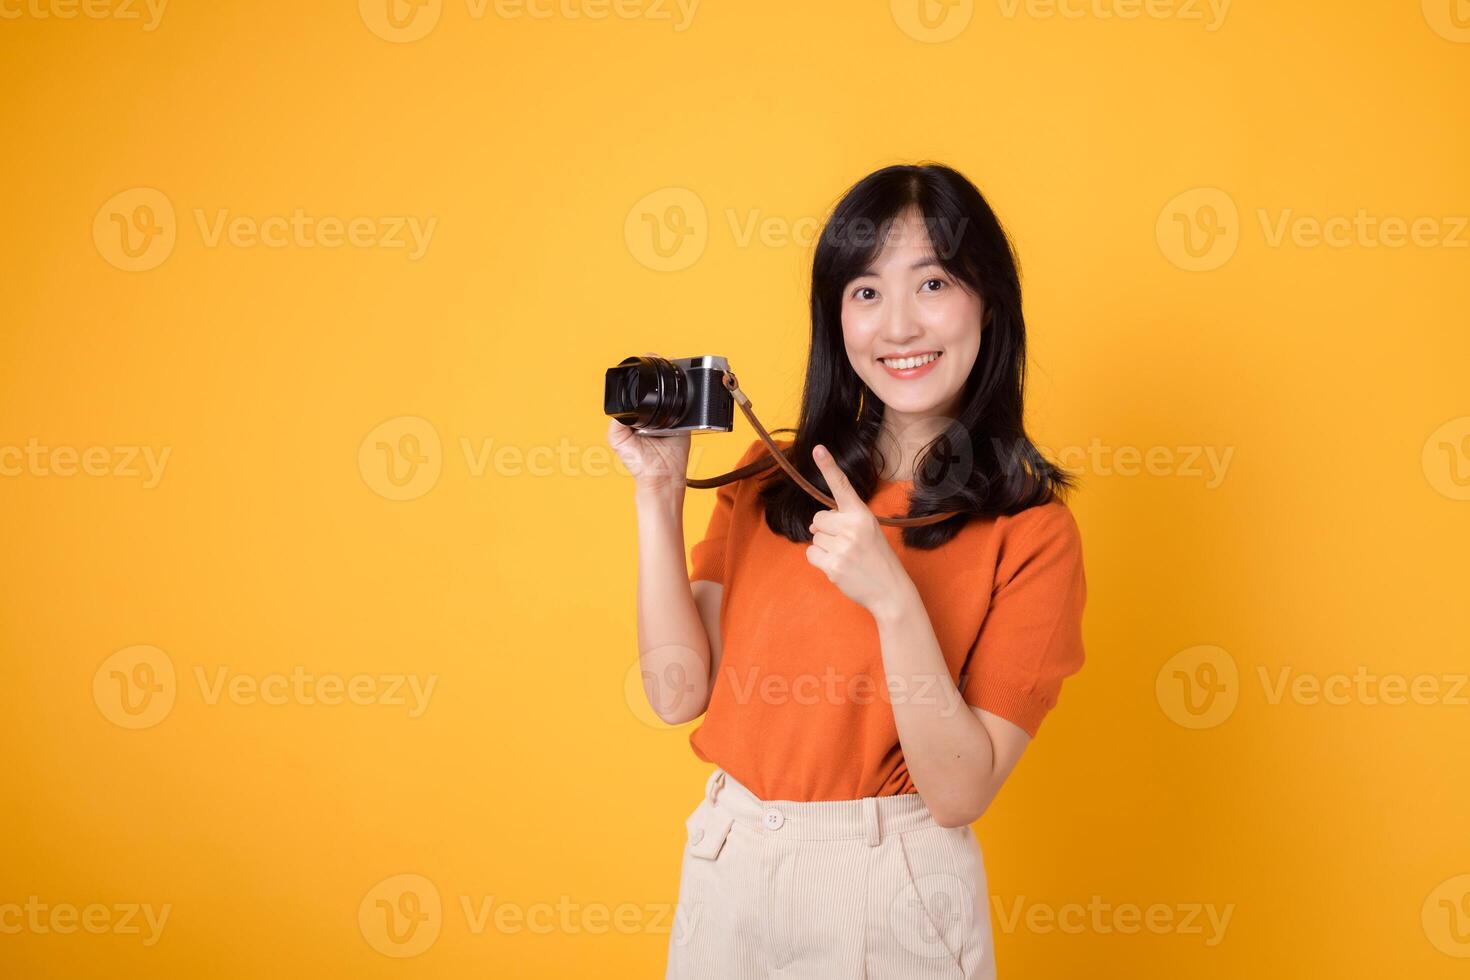 Vibrant woman with a camera isolated on yellow background, showing the adventure of exploring new places on her vacation. photo